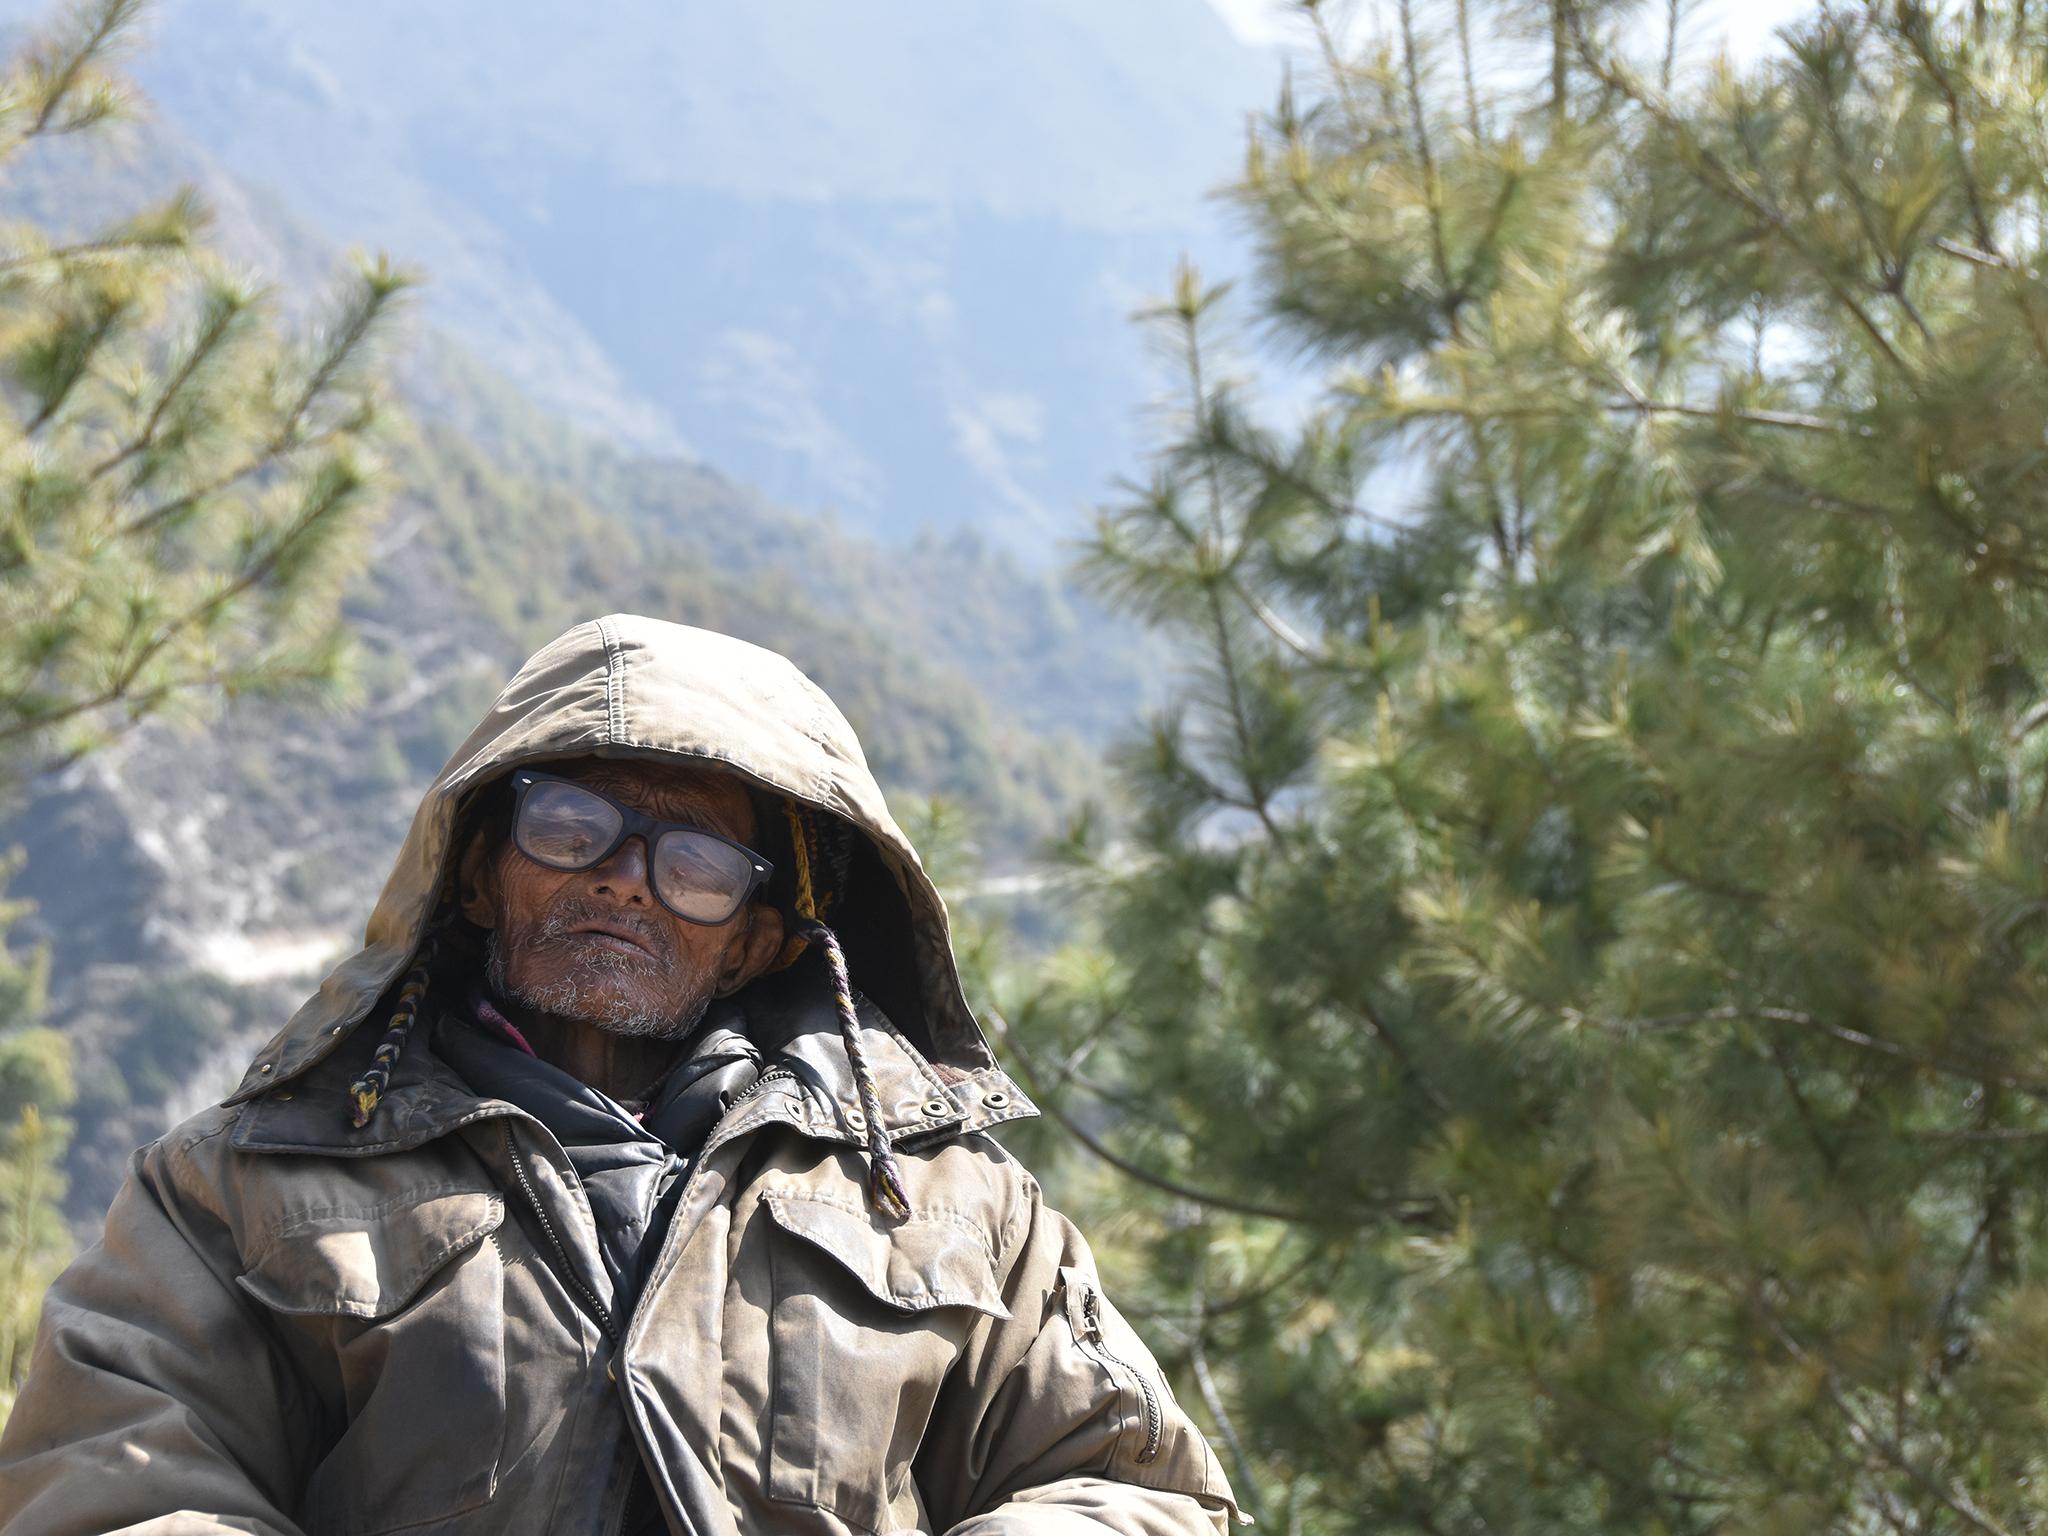 One of the Sherpas who collects money for clearing the trail